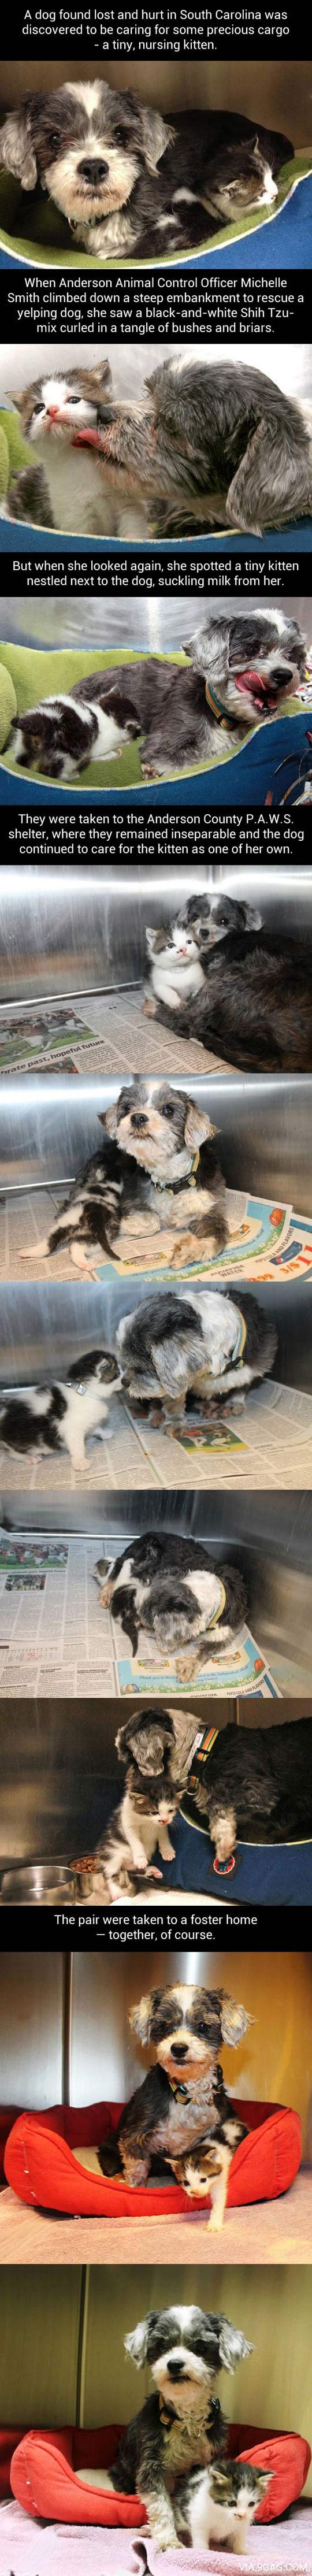 kitten, when this lost dog was found, rescuers had an unexpected surprise